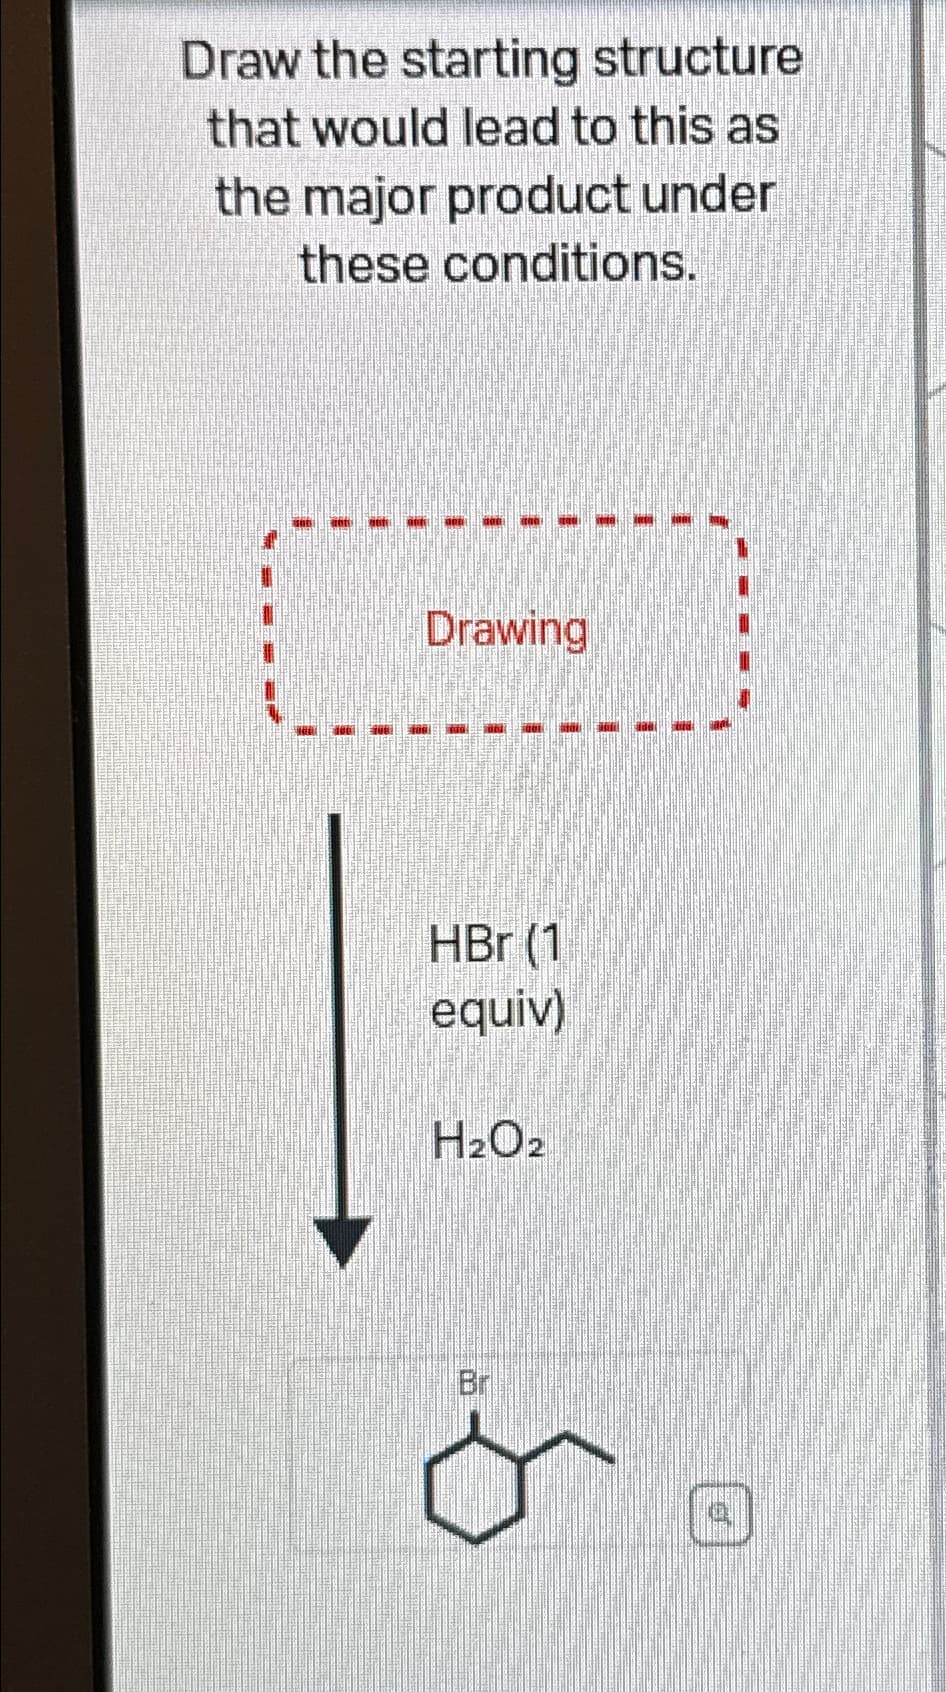 Draw the starting structure
that would lead to this as
the major product under
these conditions.
Drawing
HBr (1
equiv)
H2O2
Br